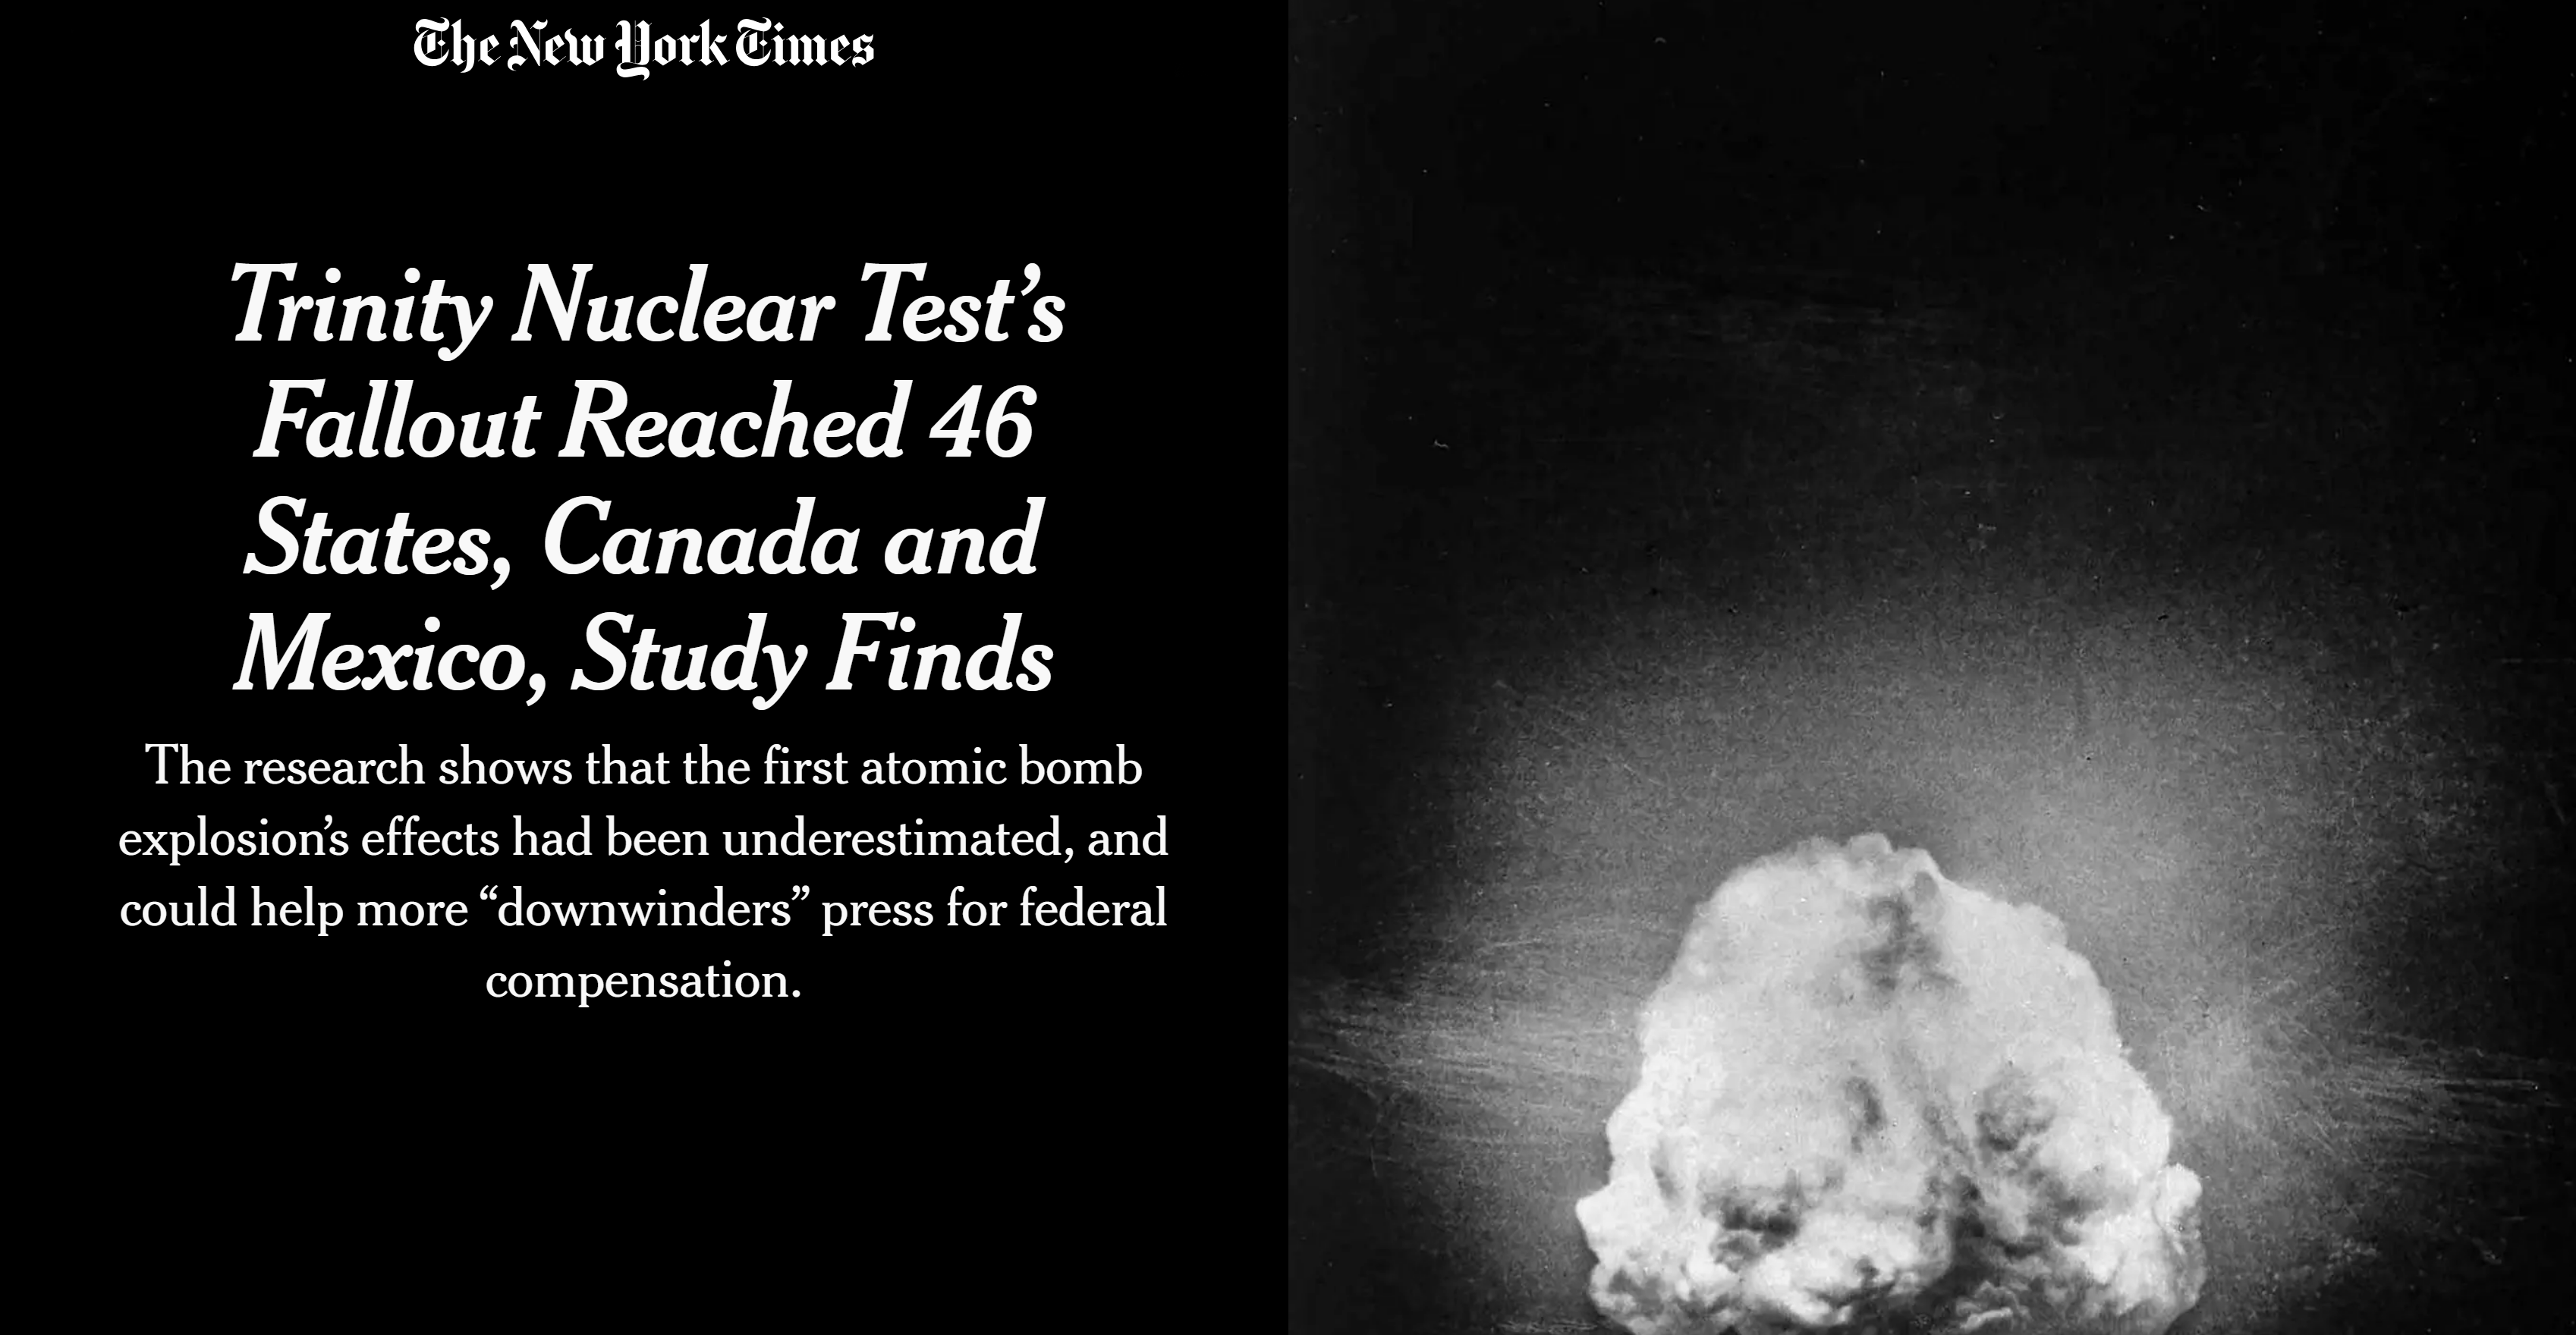 New York Times - Trinity Nuclear Tests Fallout Reached 46 States Canada and Mexico Study Finds